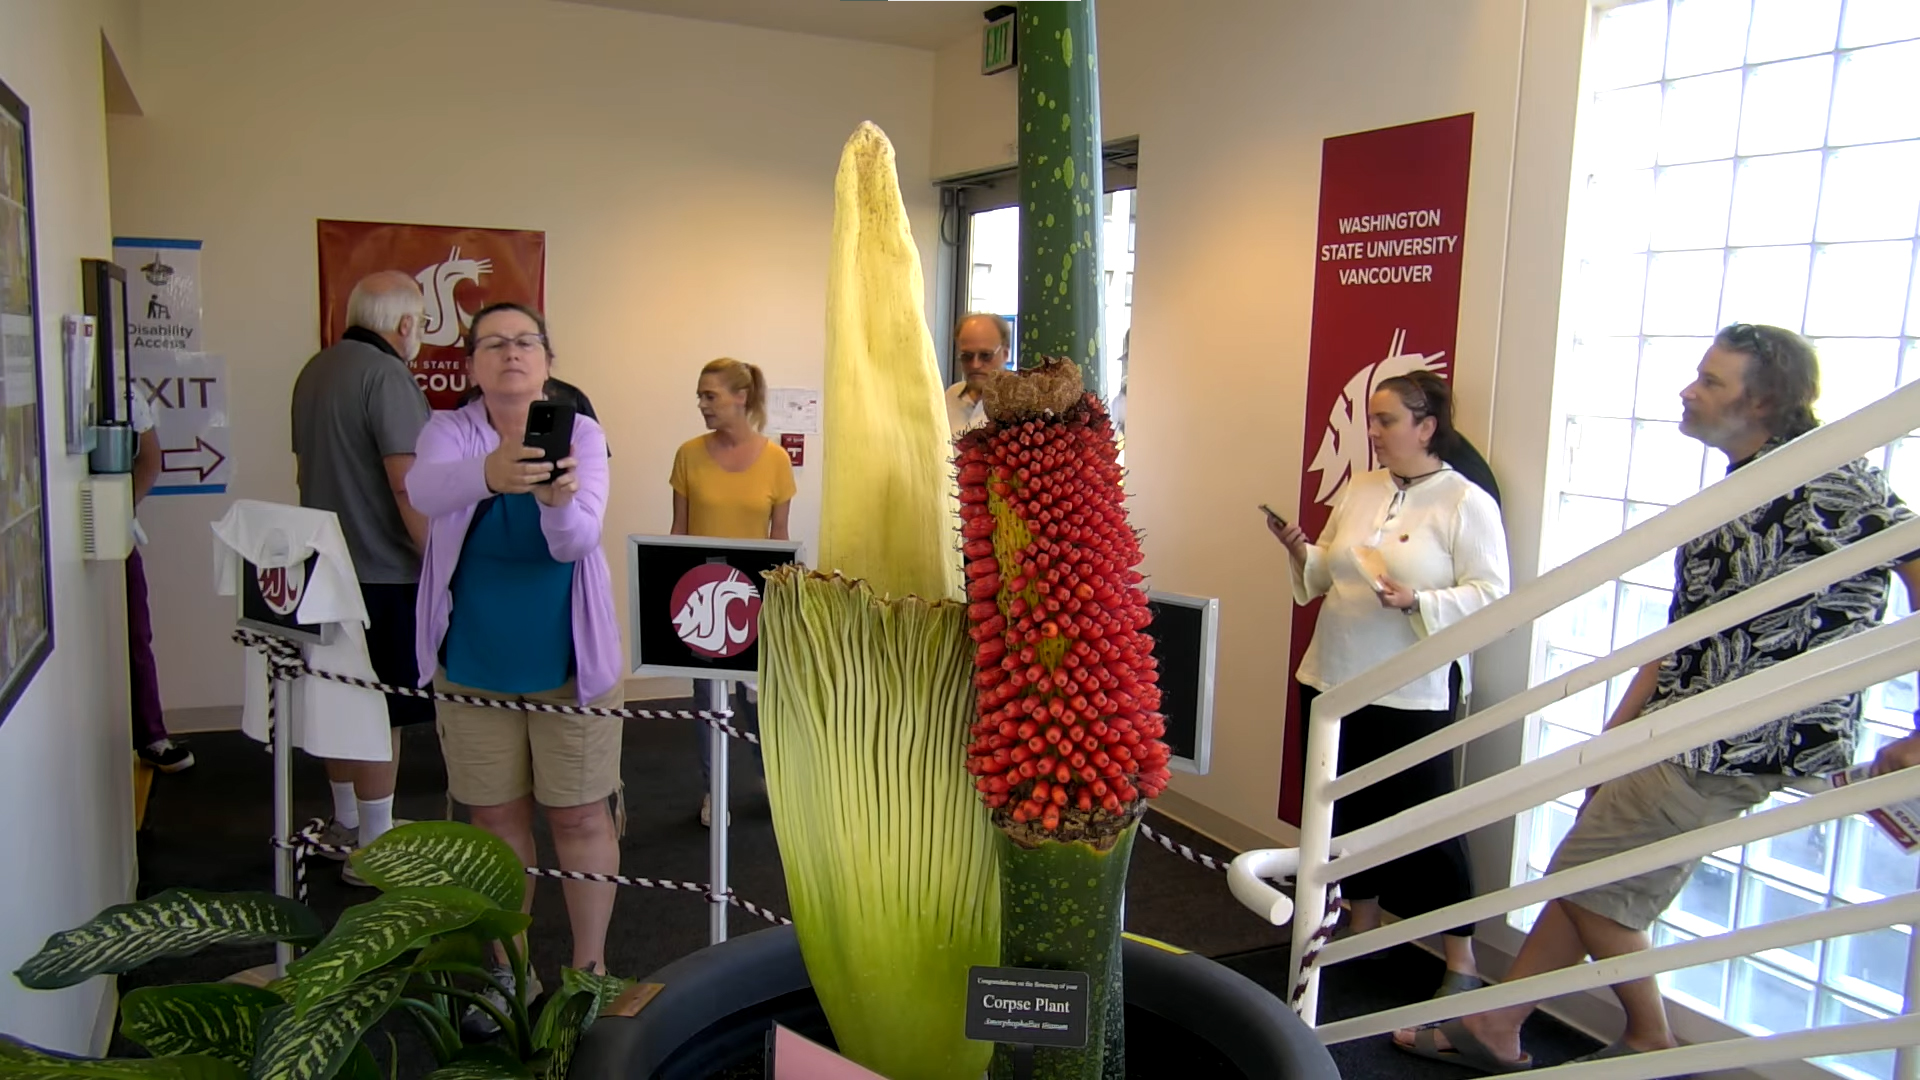 Washington State University Vancover’s rare corpse flower “Titan VanCoug” is now blooming and will be showcased on campus from 8 a.m. to 7 p.m. Friday.